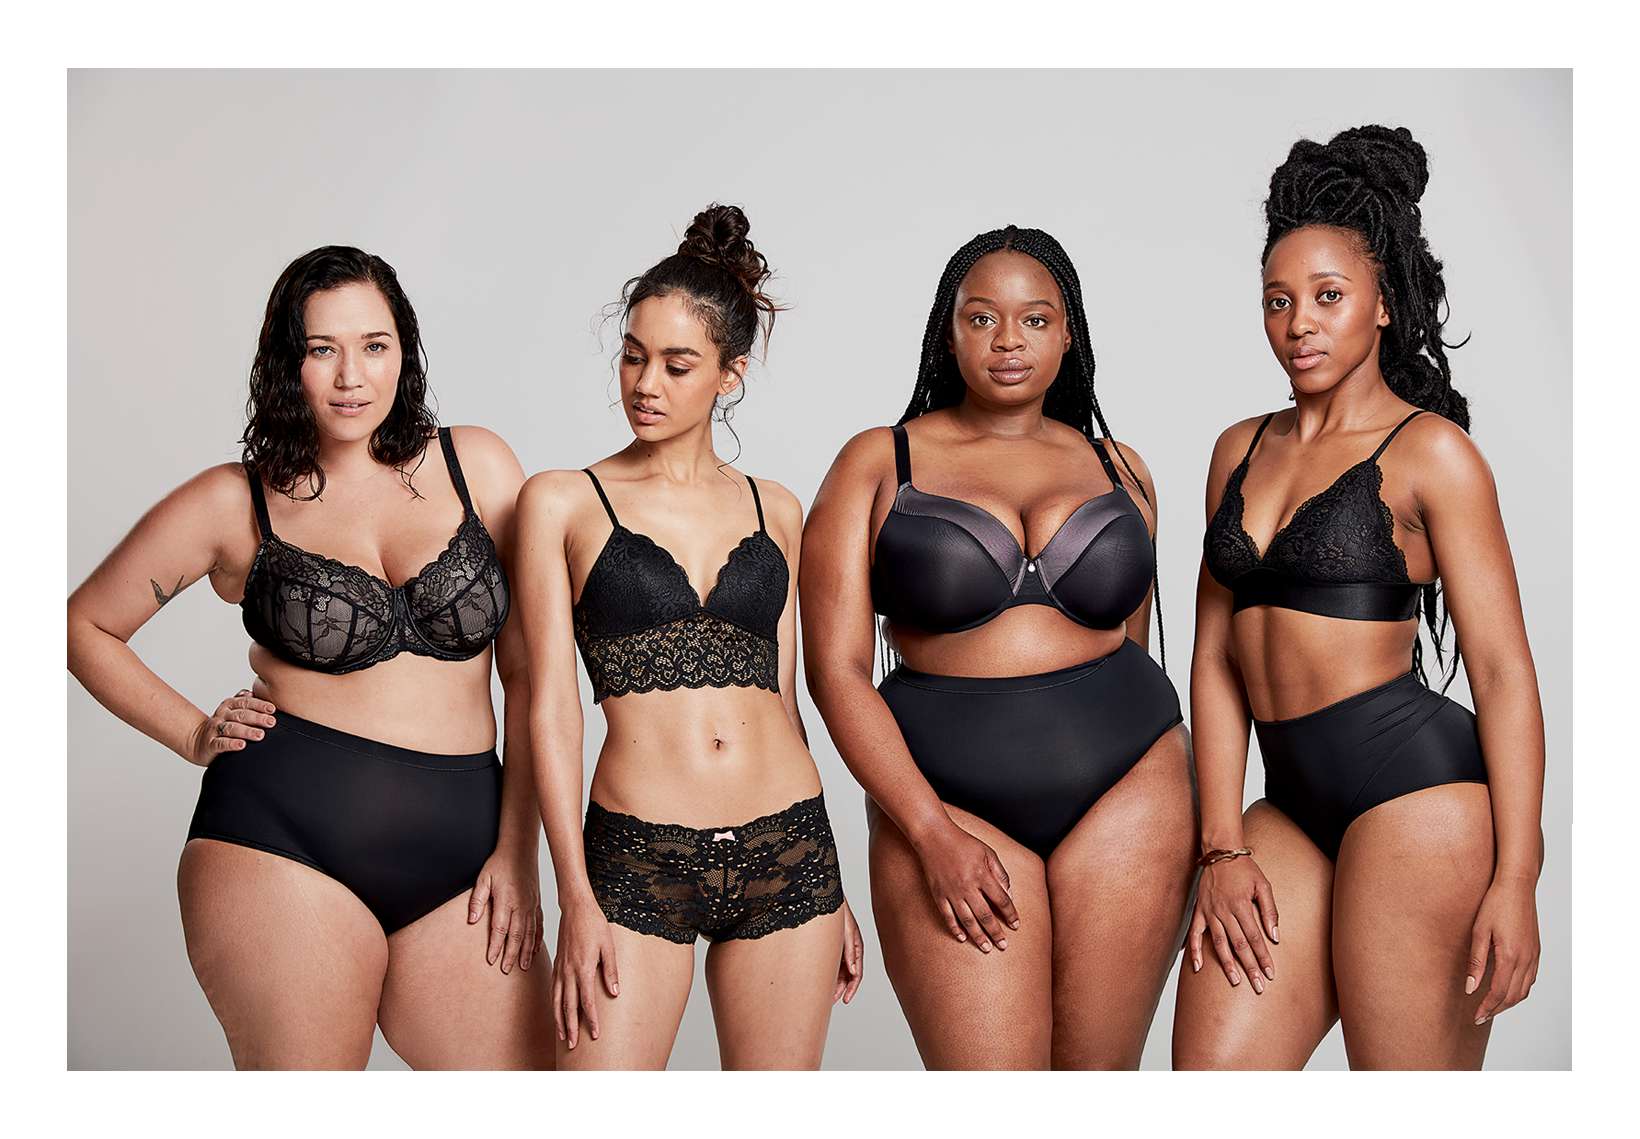 WOOLWORTHS - Meet our Soft & Flexy Bra 👋 Designed to be your